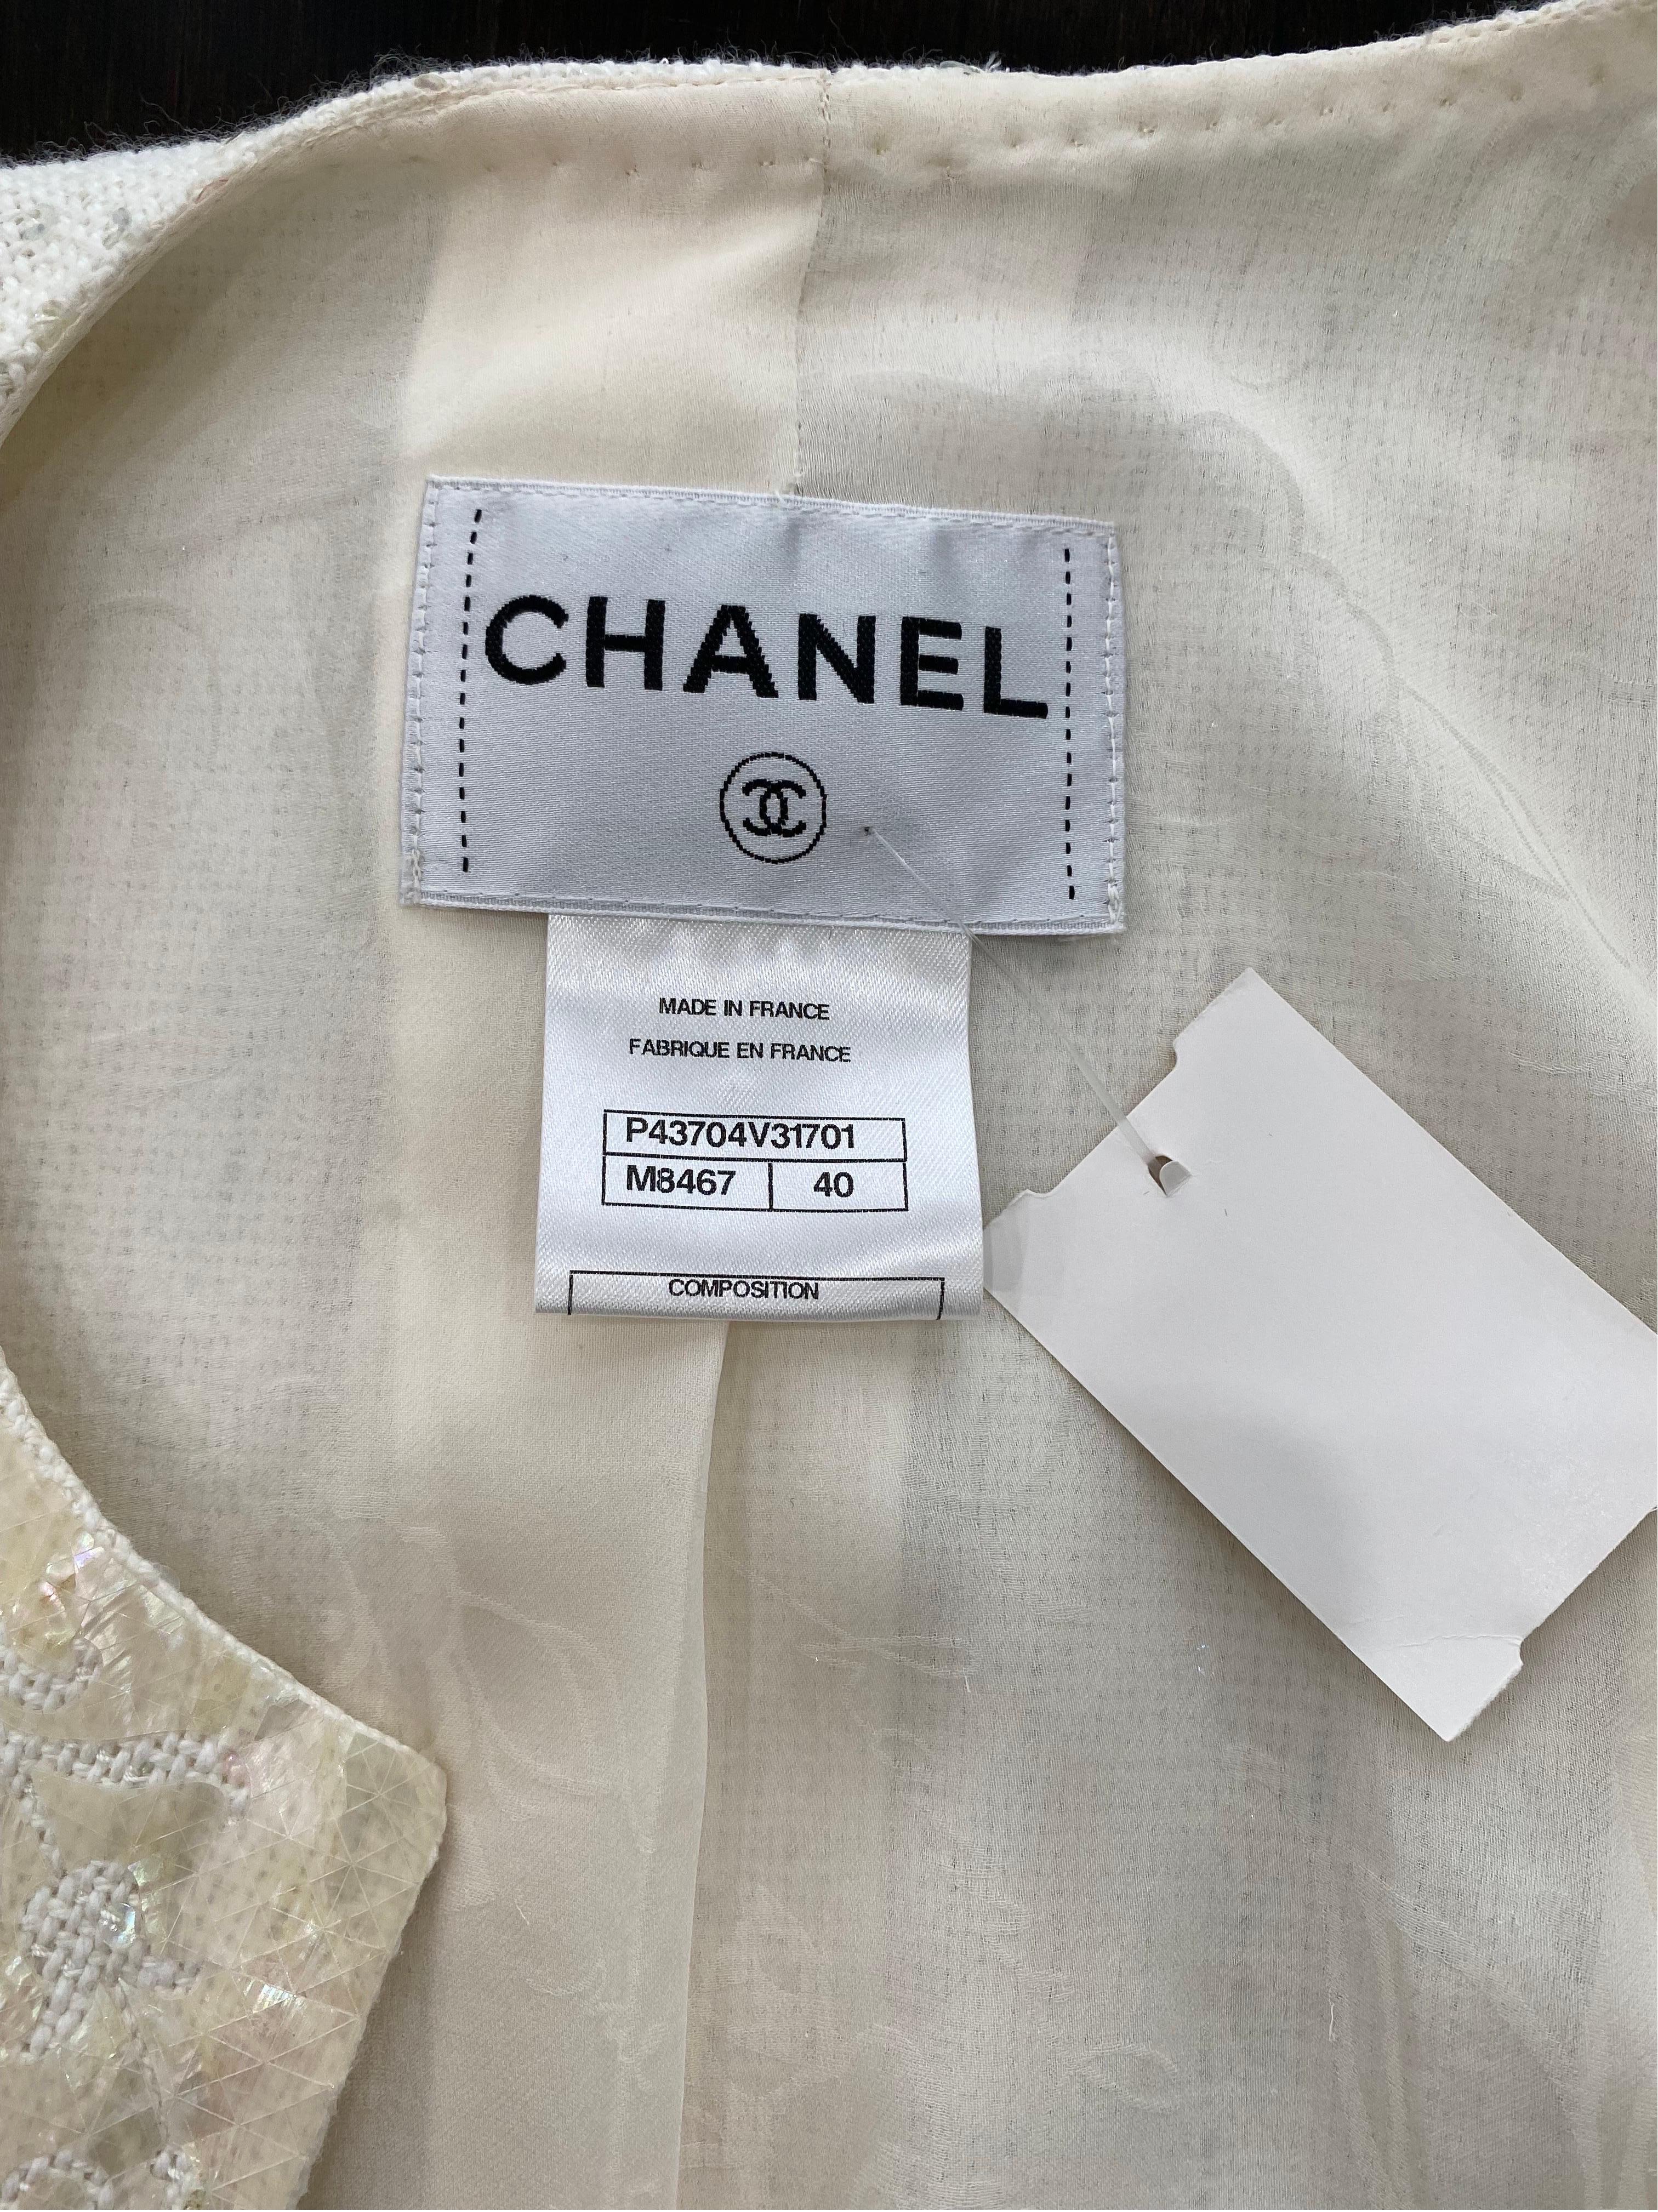 Chanel Runway 2012P Cream Cotton Embellished Strapless Dress with Jacket-Sz 40  For Sale 8